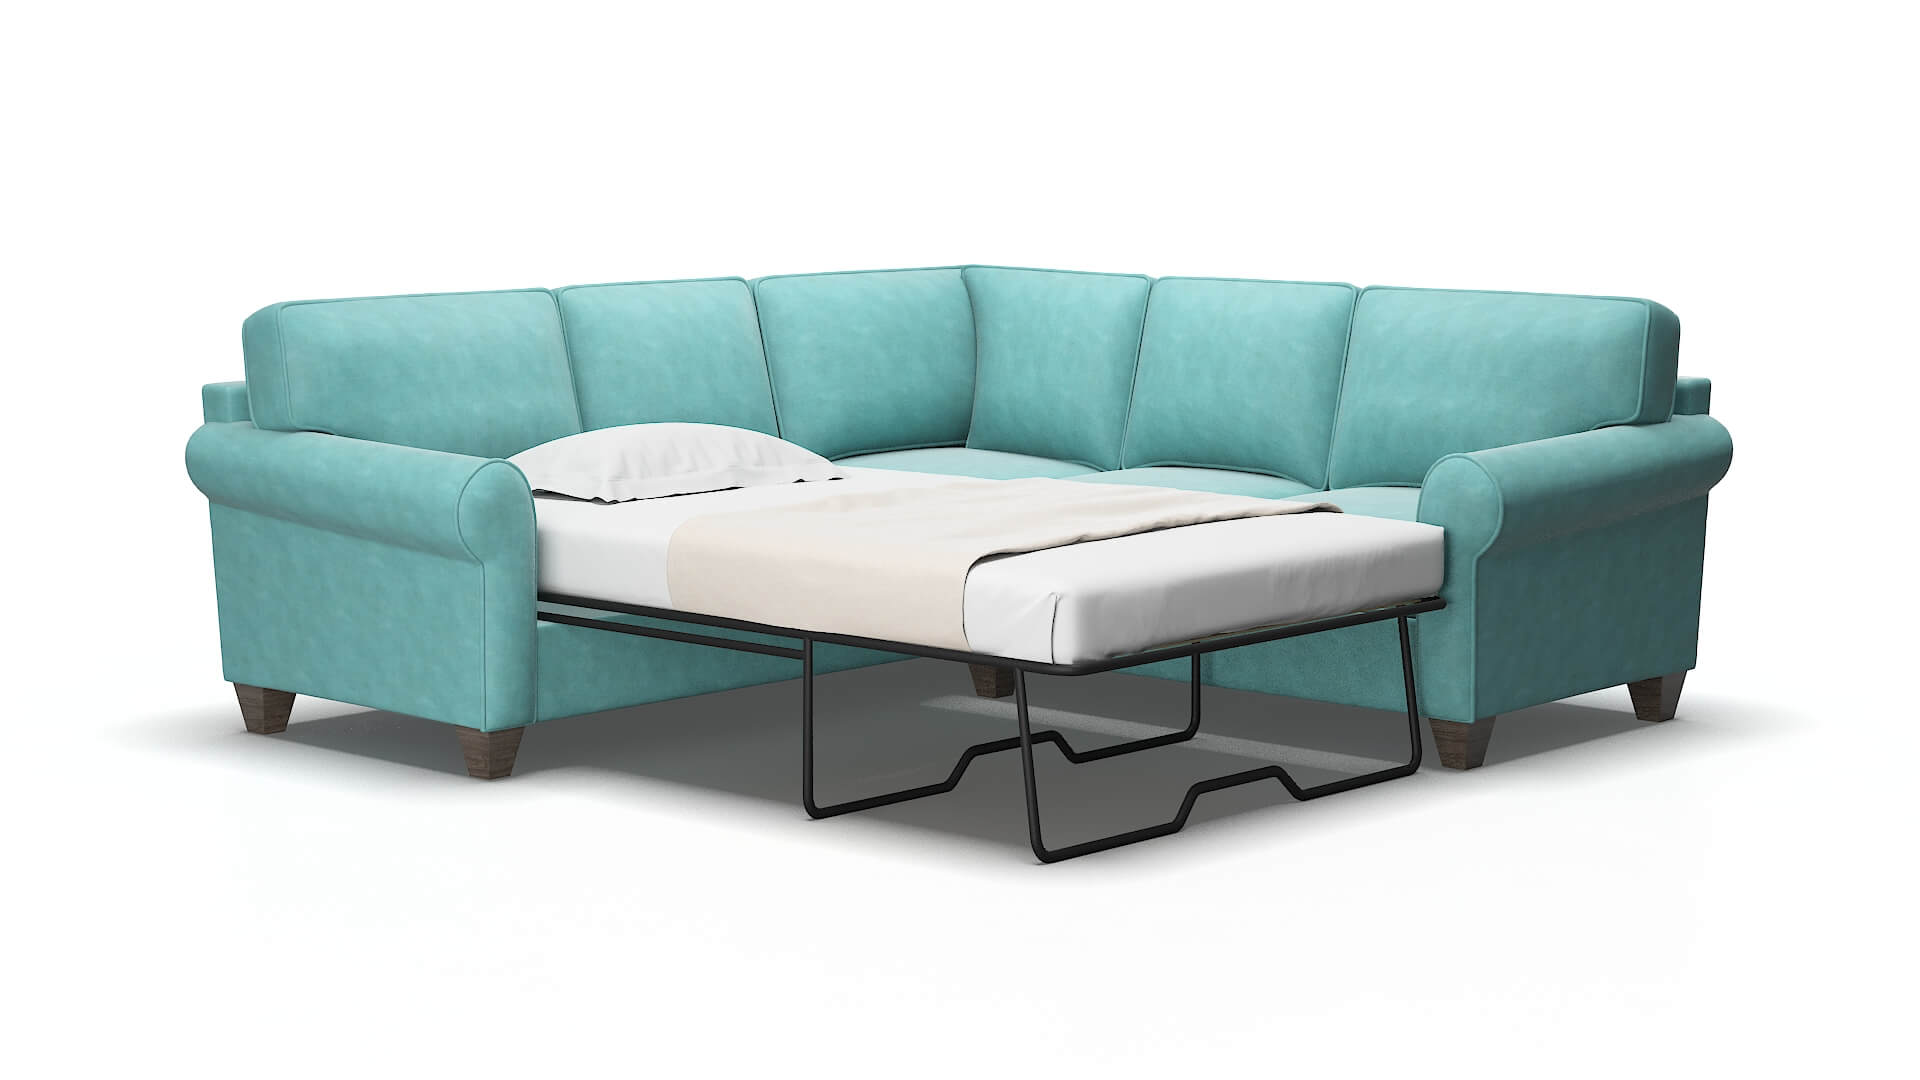 Augusta Curious Turquoise Sectional Sleeper 2